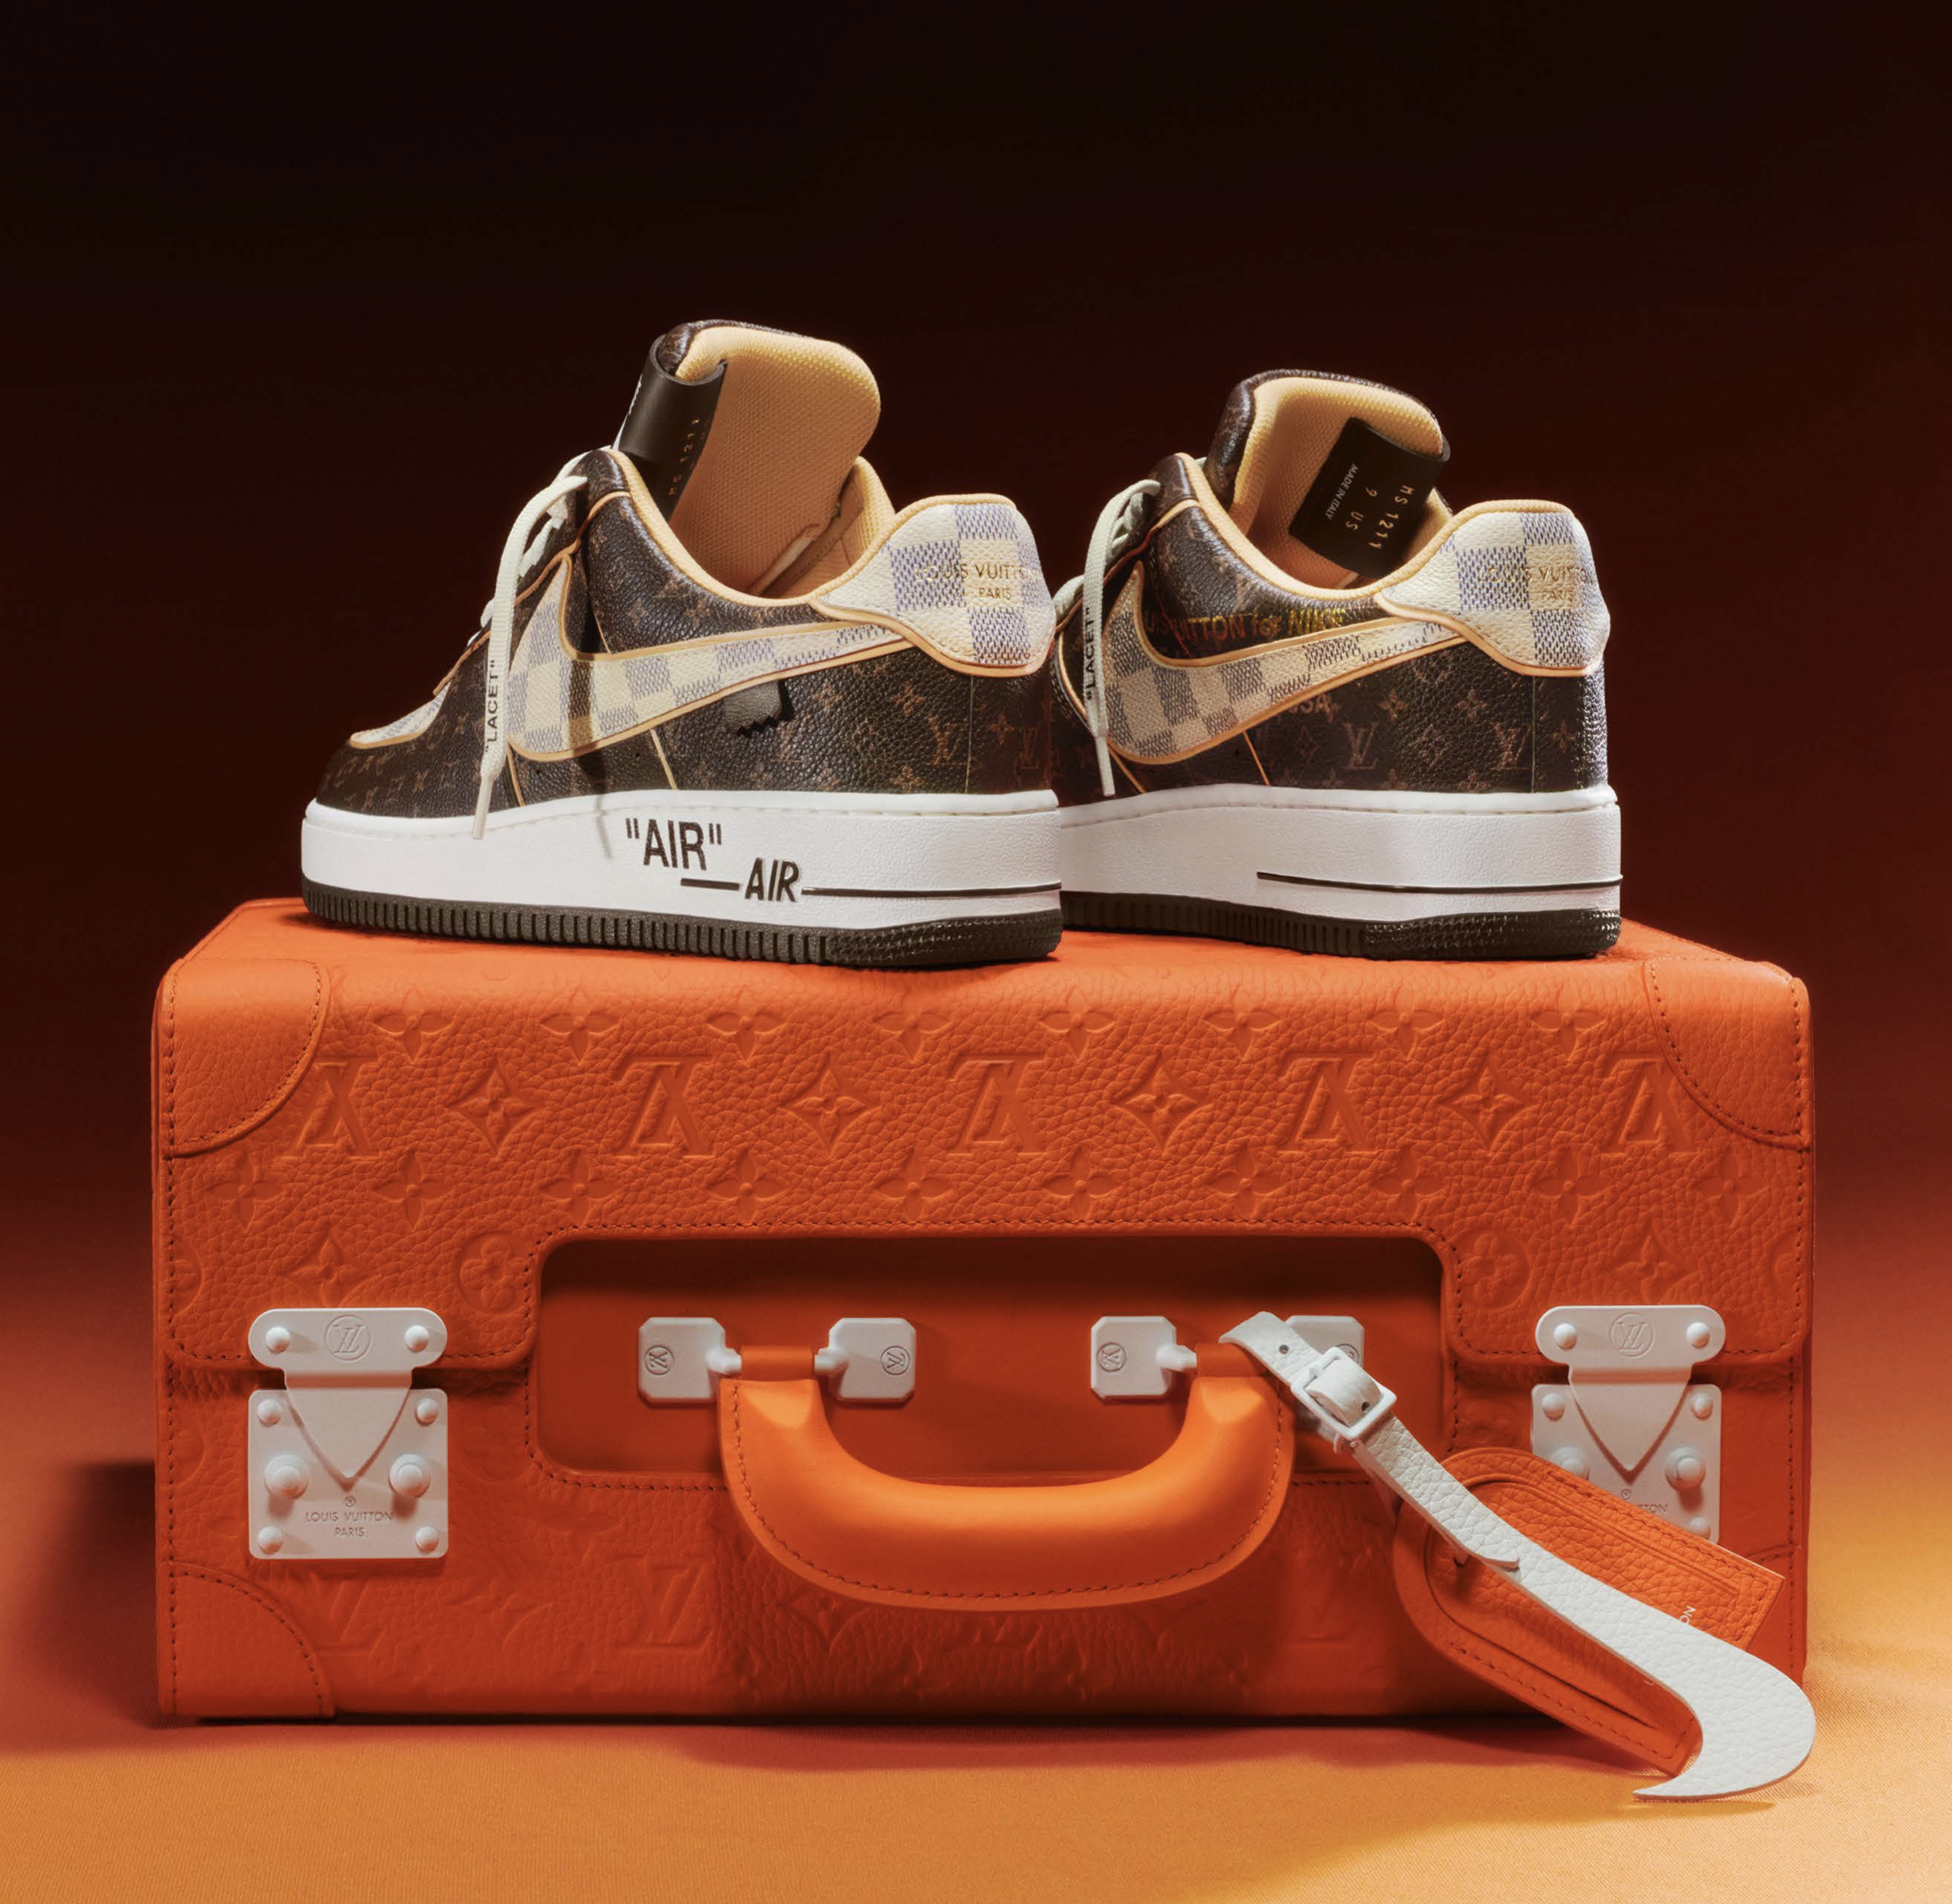 Louis Vuitton x Nike Air Force 1 Limited Collaboration: Unboxing